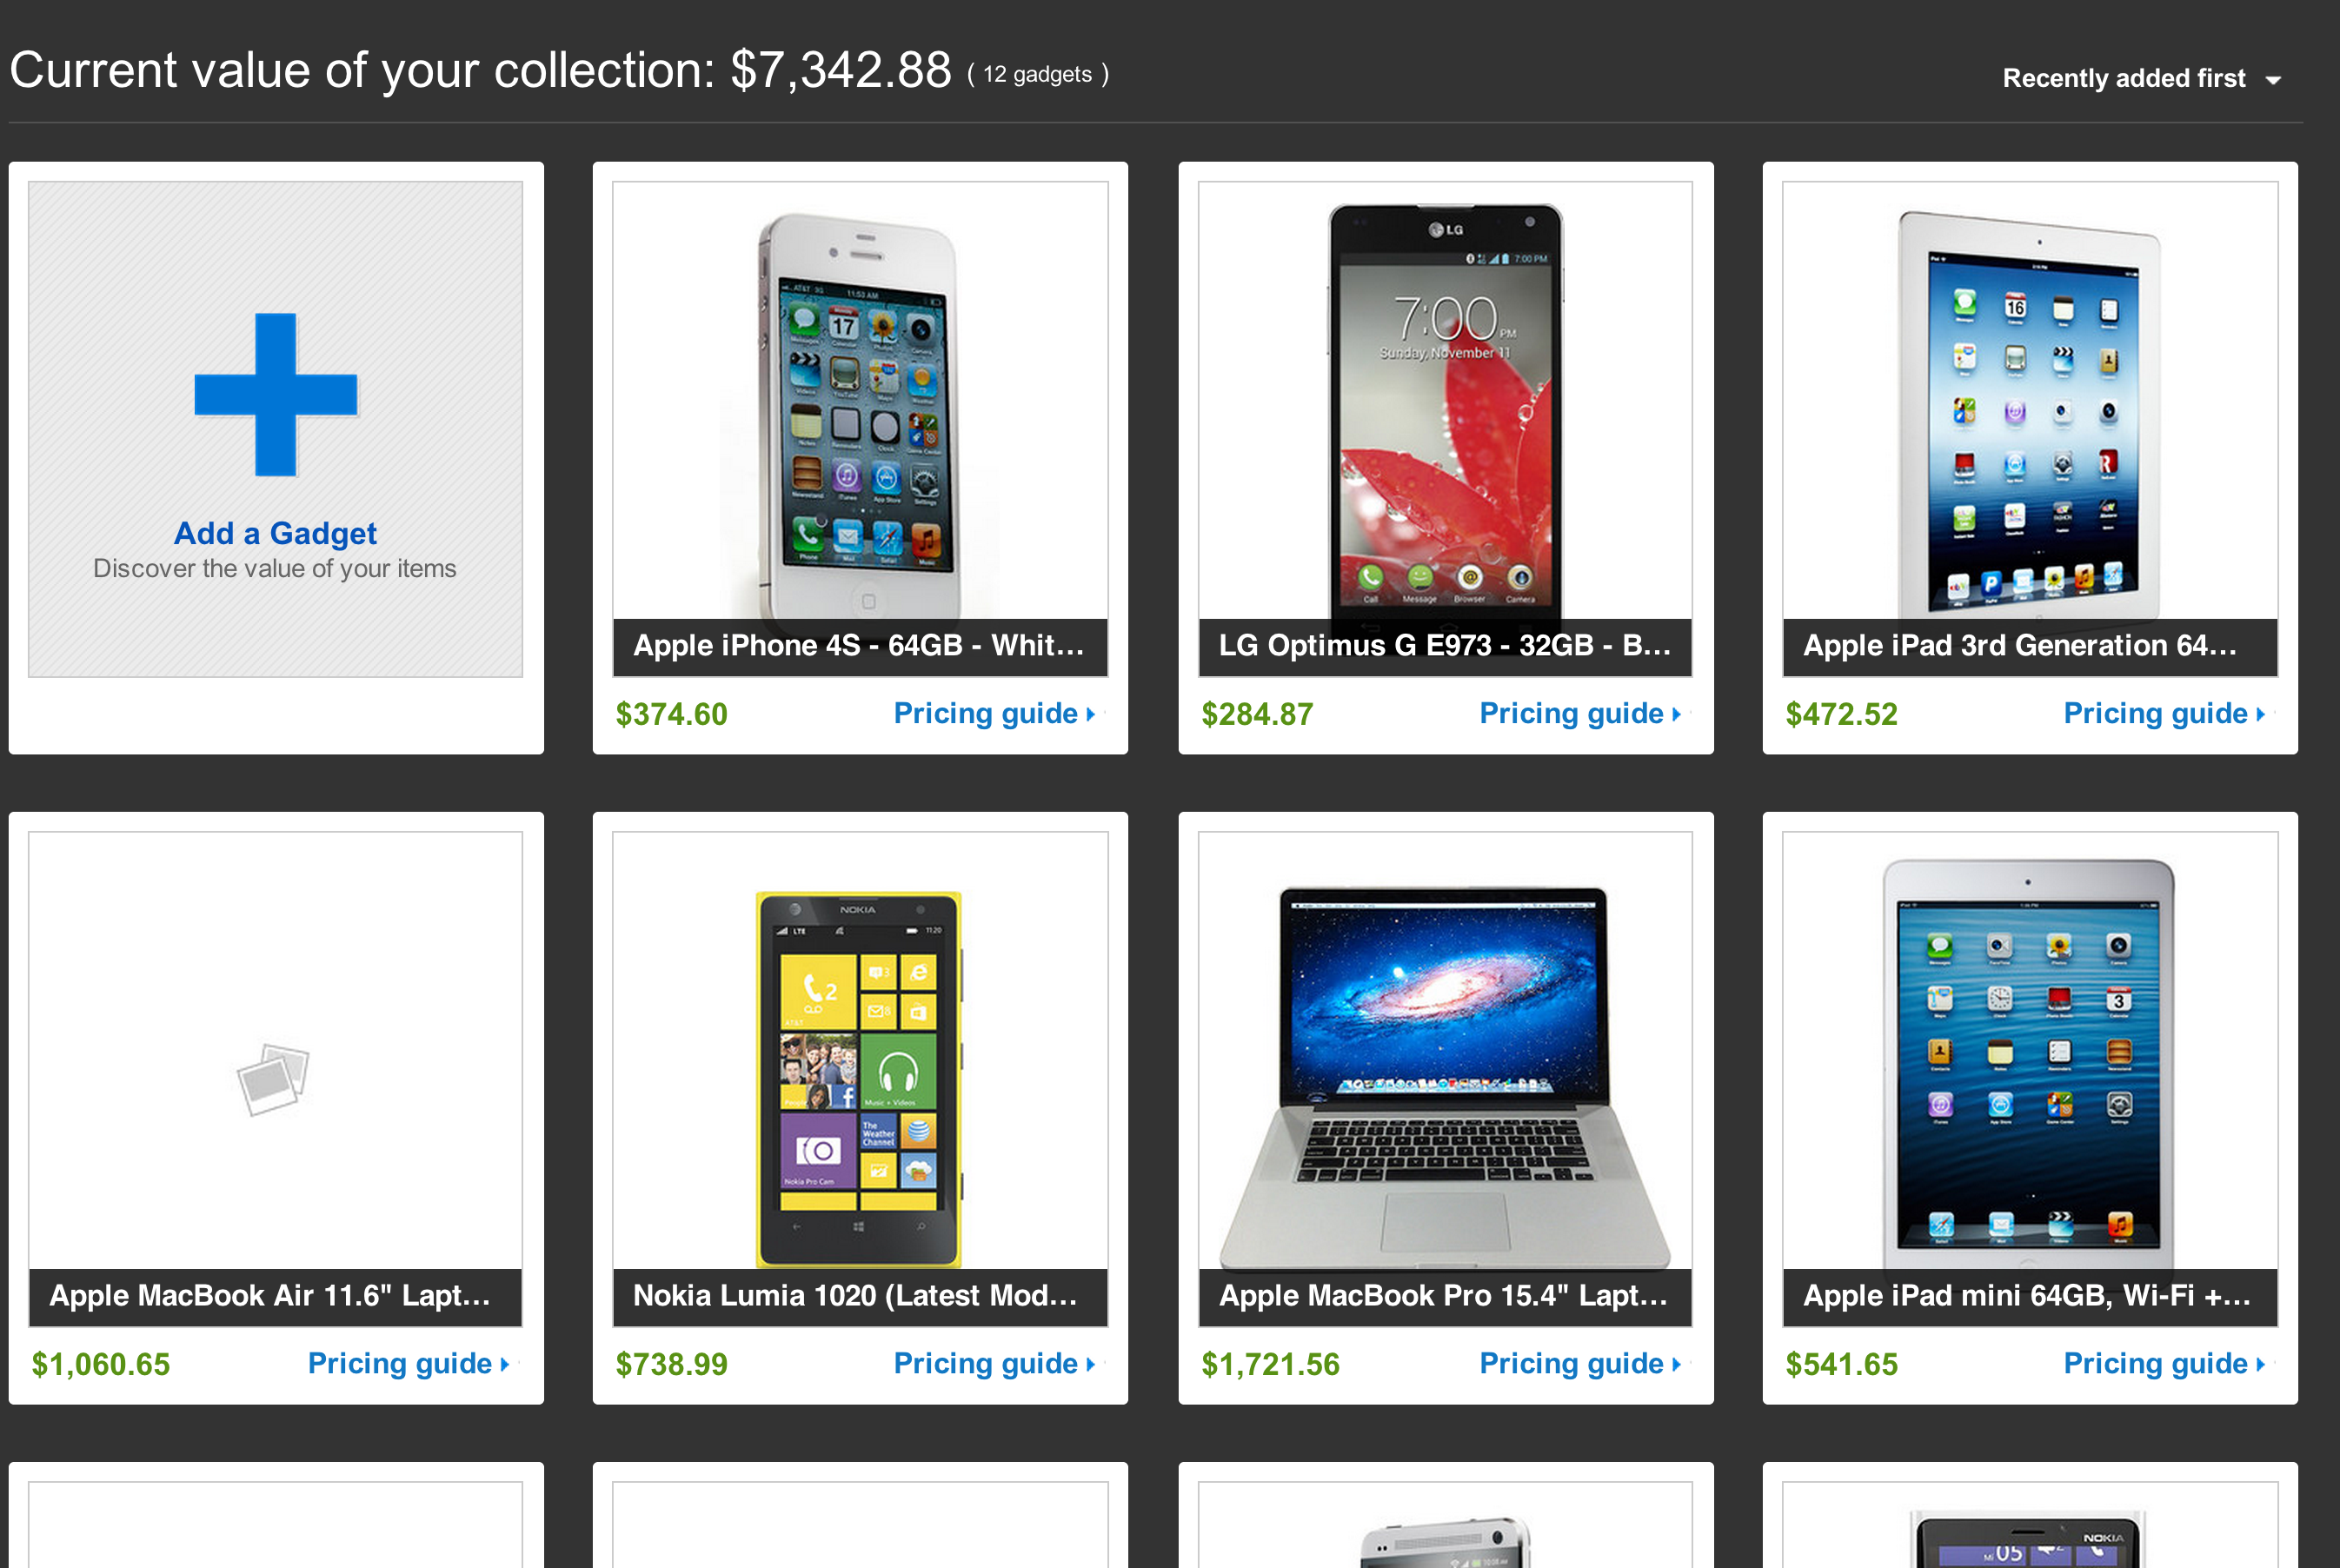 eBay Launches My Gadgets, a Way for You to Catalog and Value Your Gadget & Tech Collection